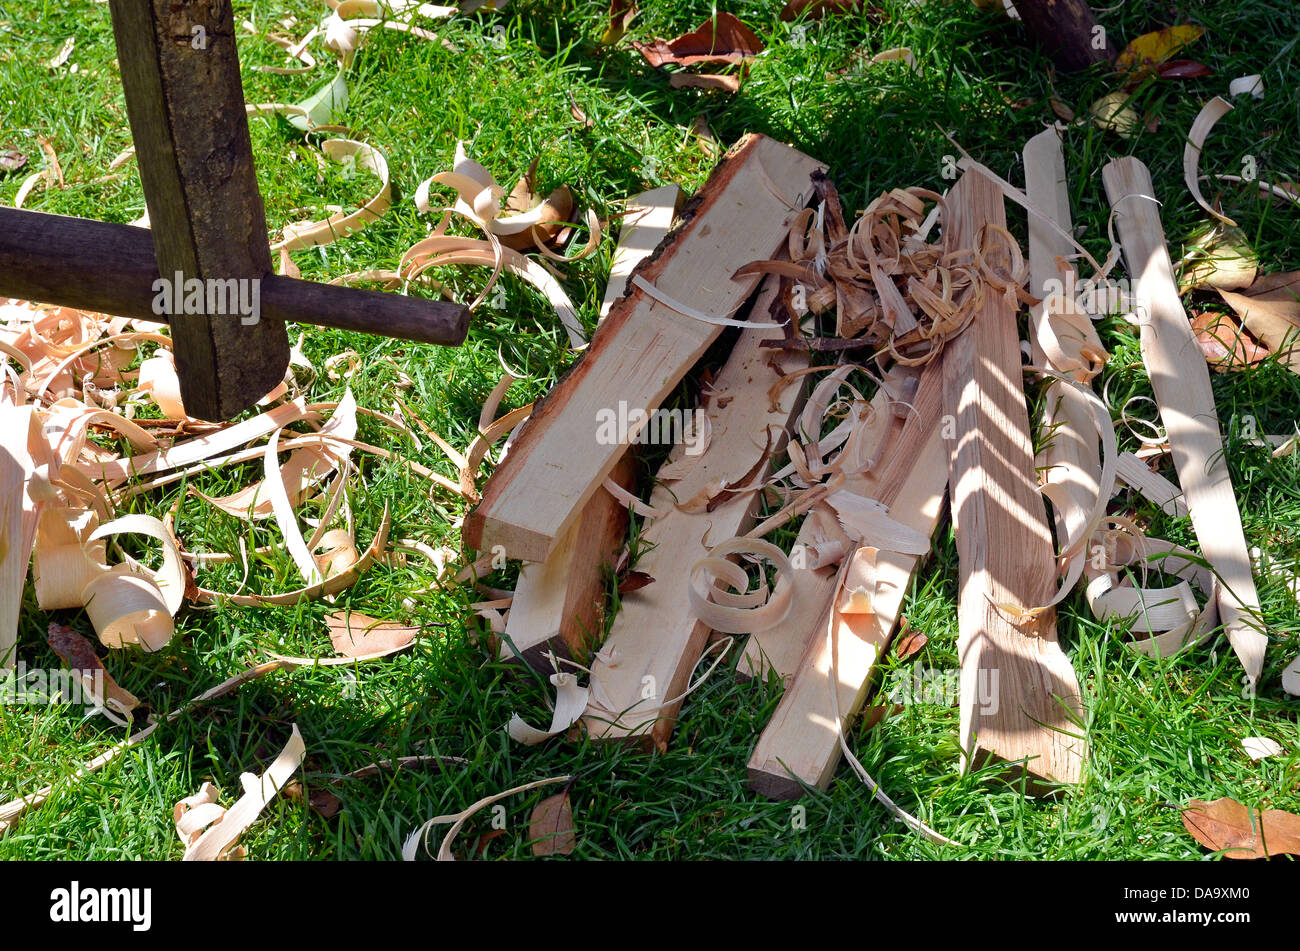 Woodsman or bodgers shave horse with shavings and part completed items - part of a demonstration at a country fair. Stock Photo